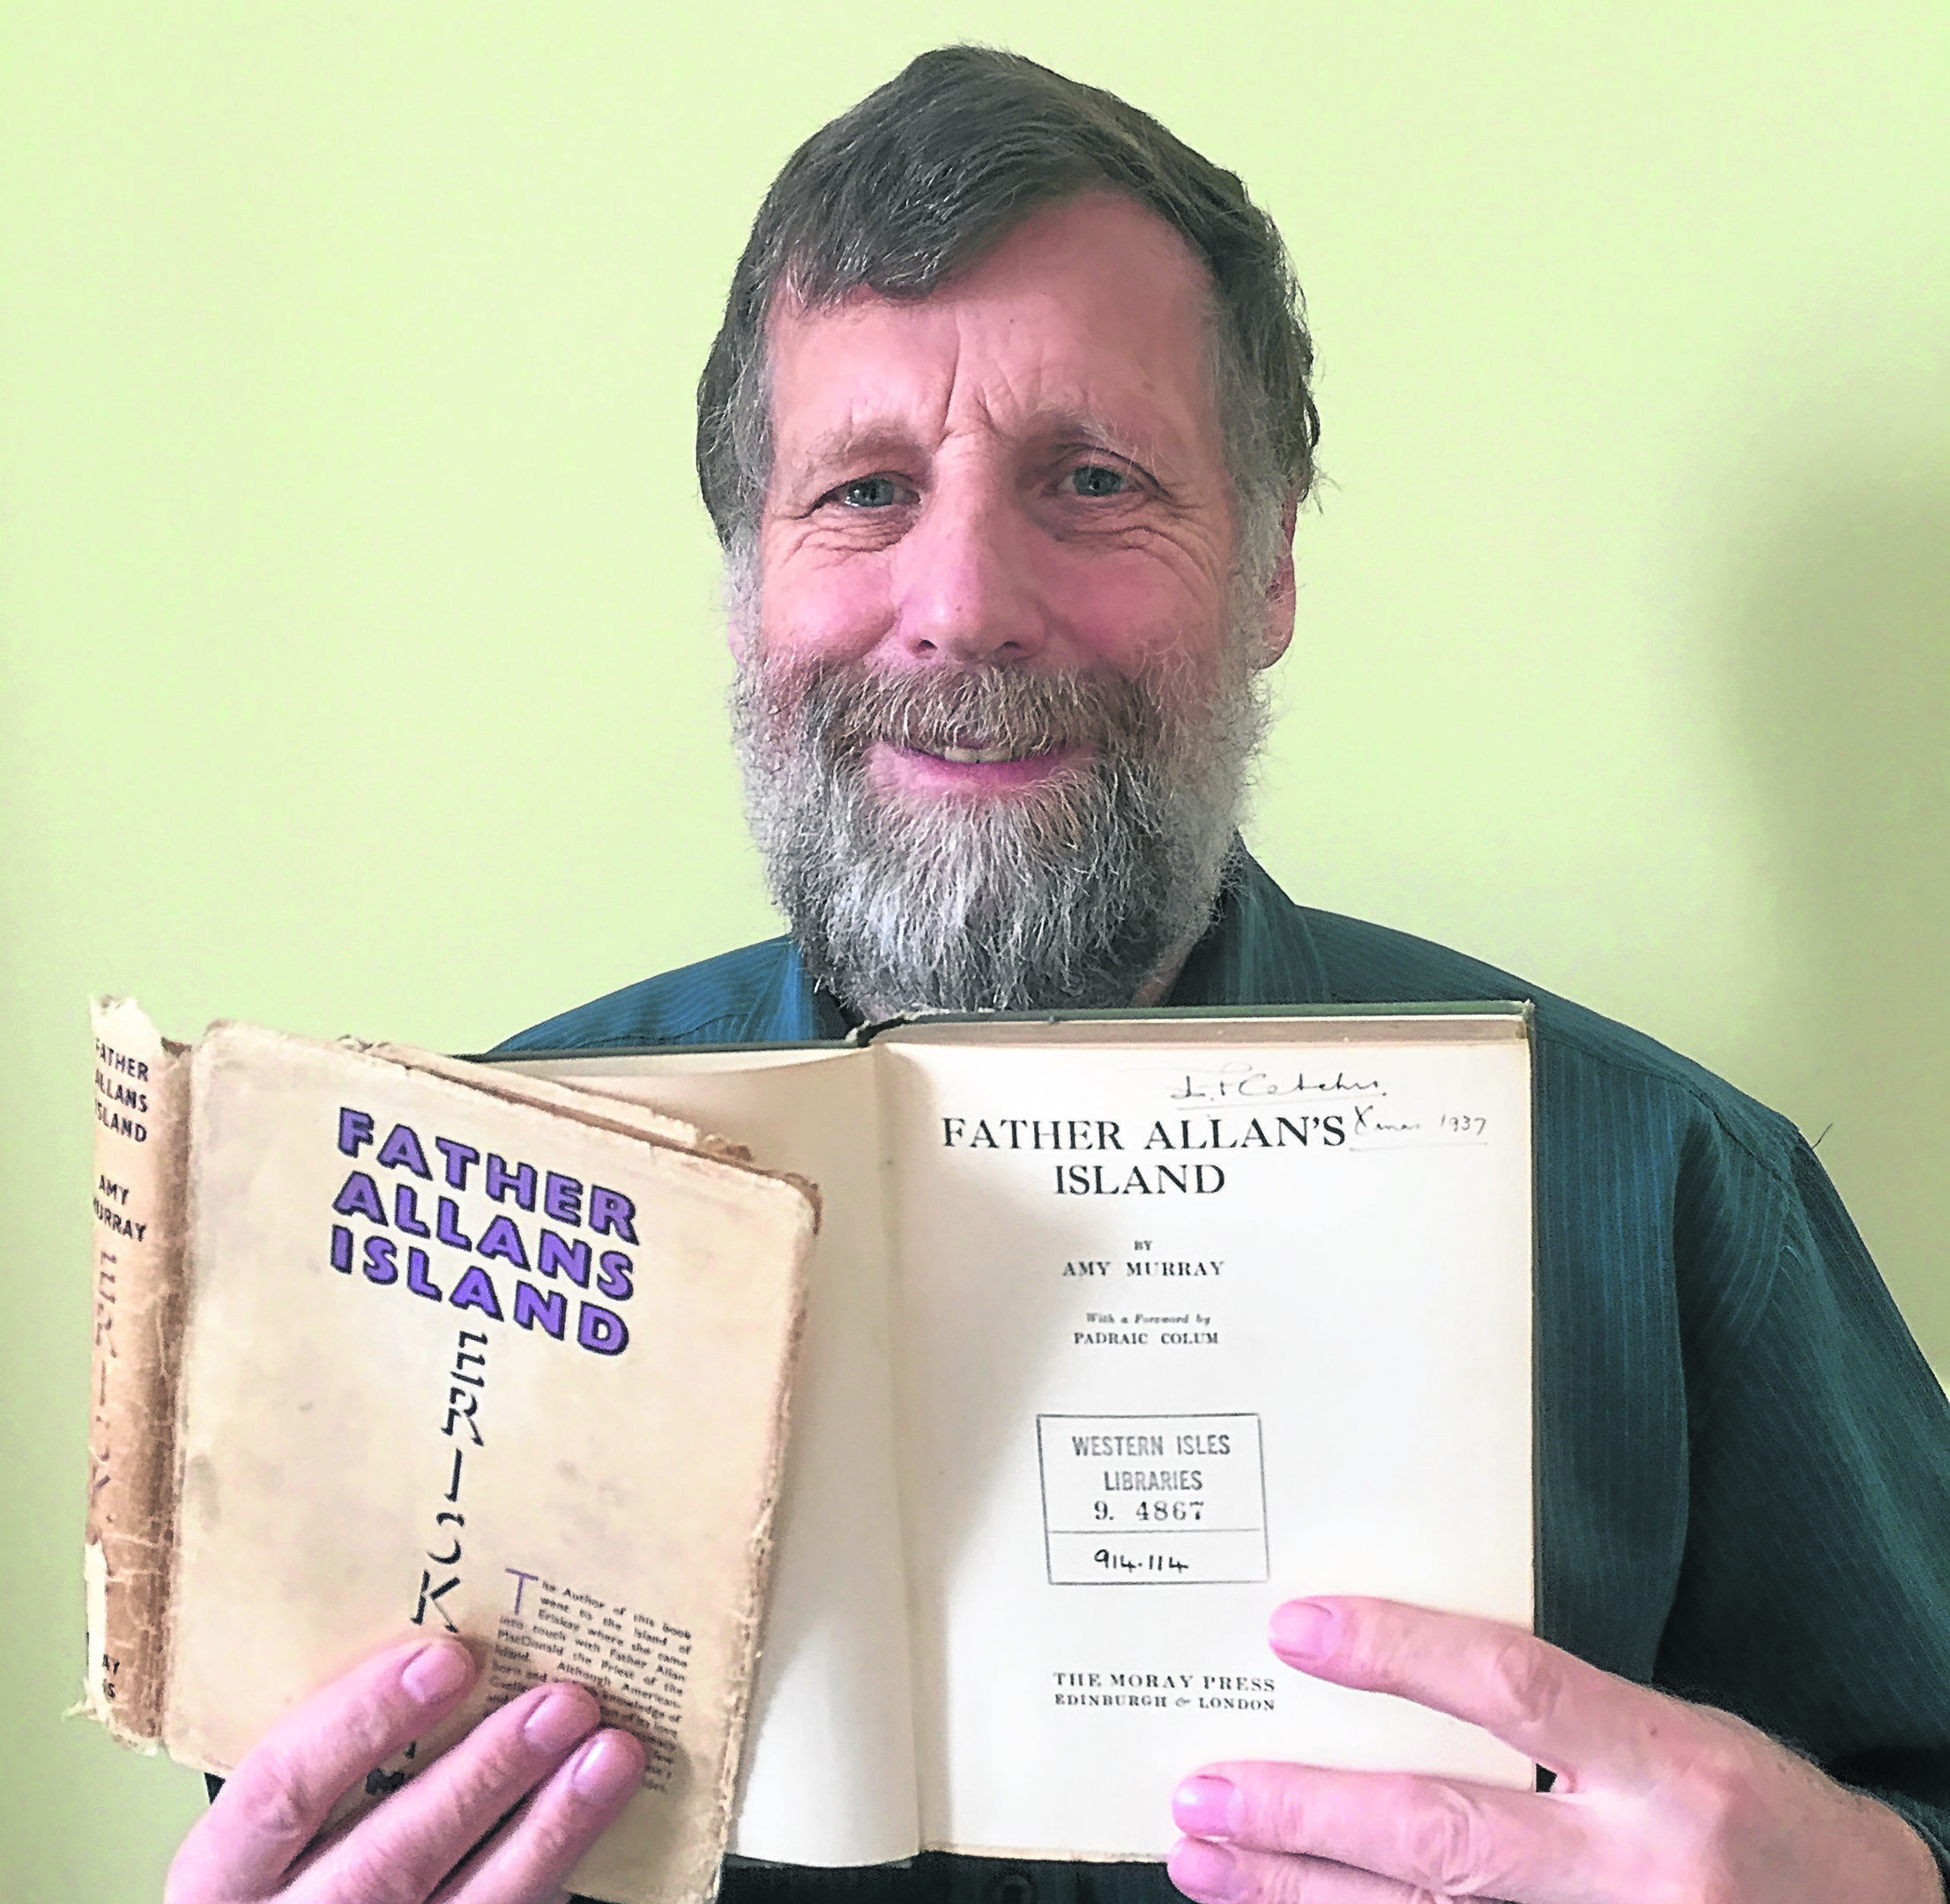 Long Overdue Book Finally Makes it Back to Stornoway Library, Thanks to Alastair